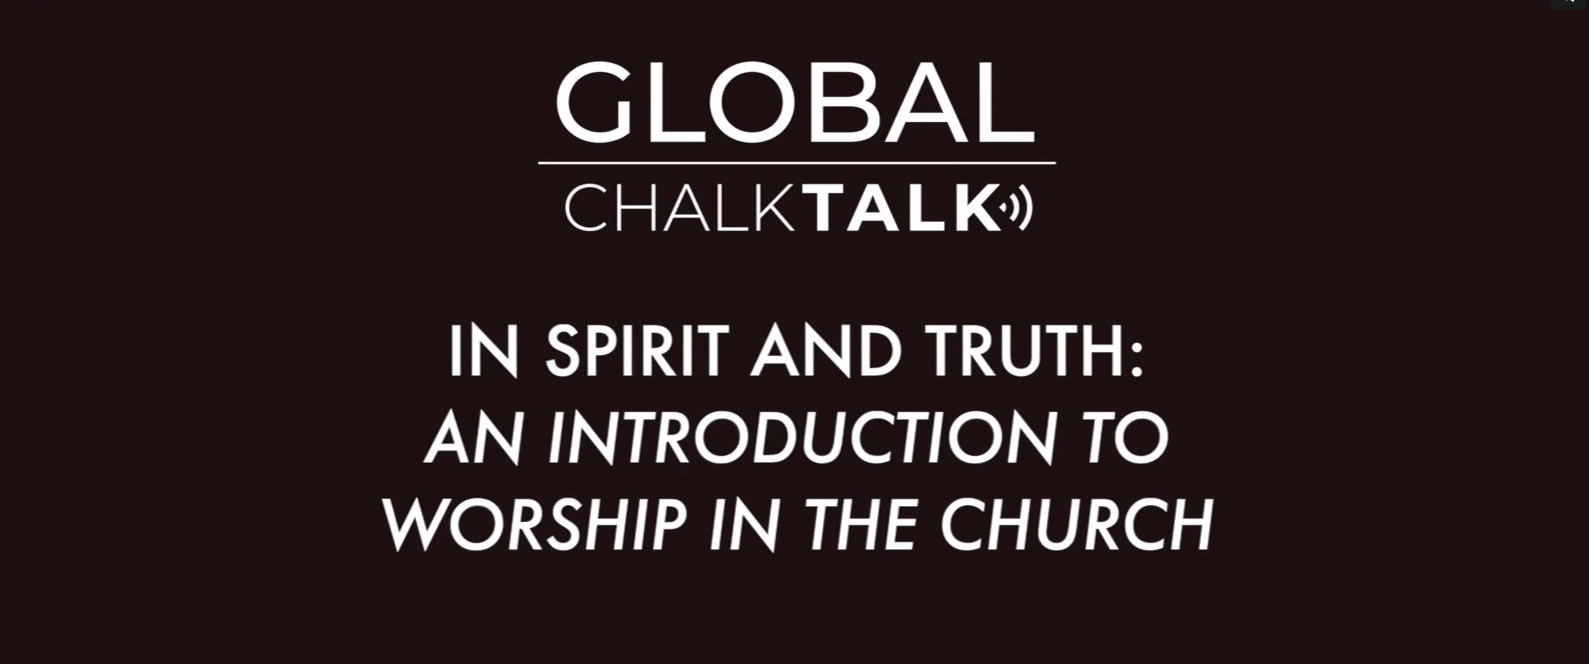 Global Chalk Talk, In Spirit and Truth, and Introduction to worship in the church